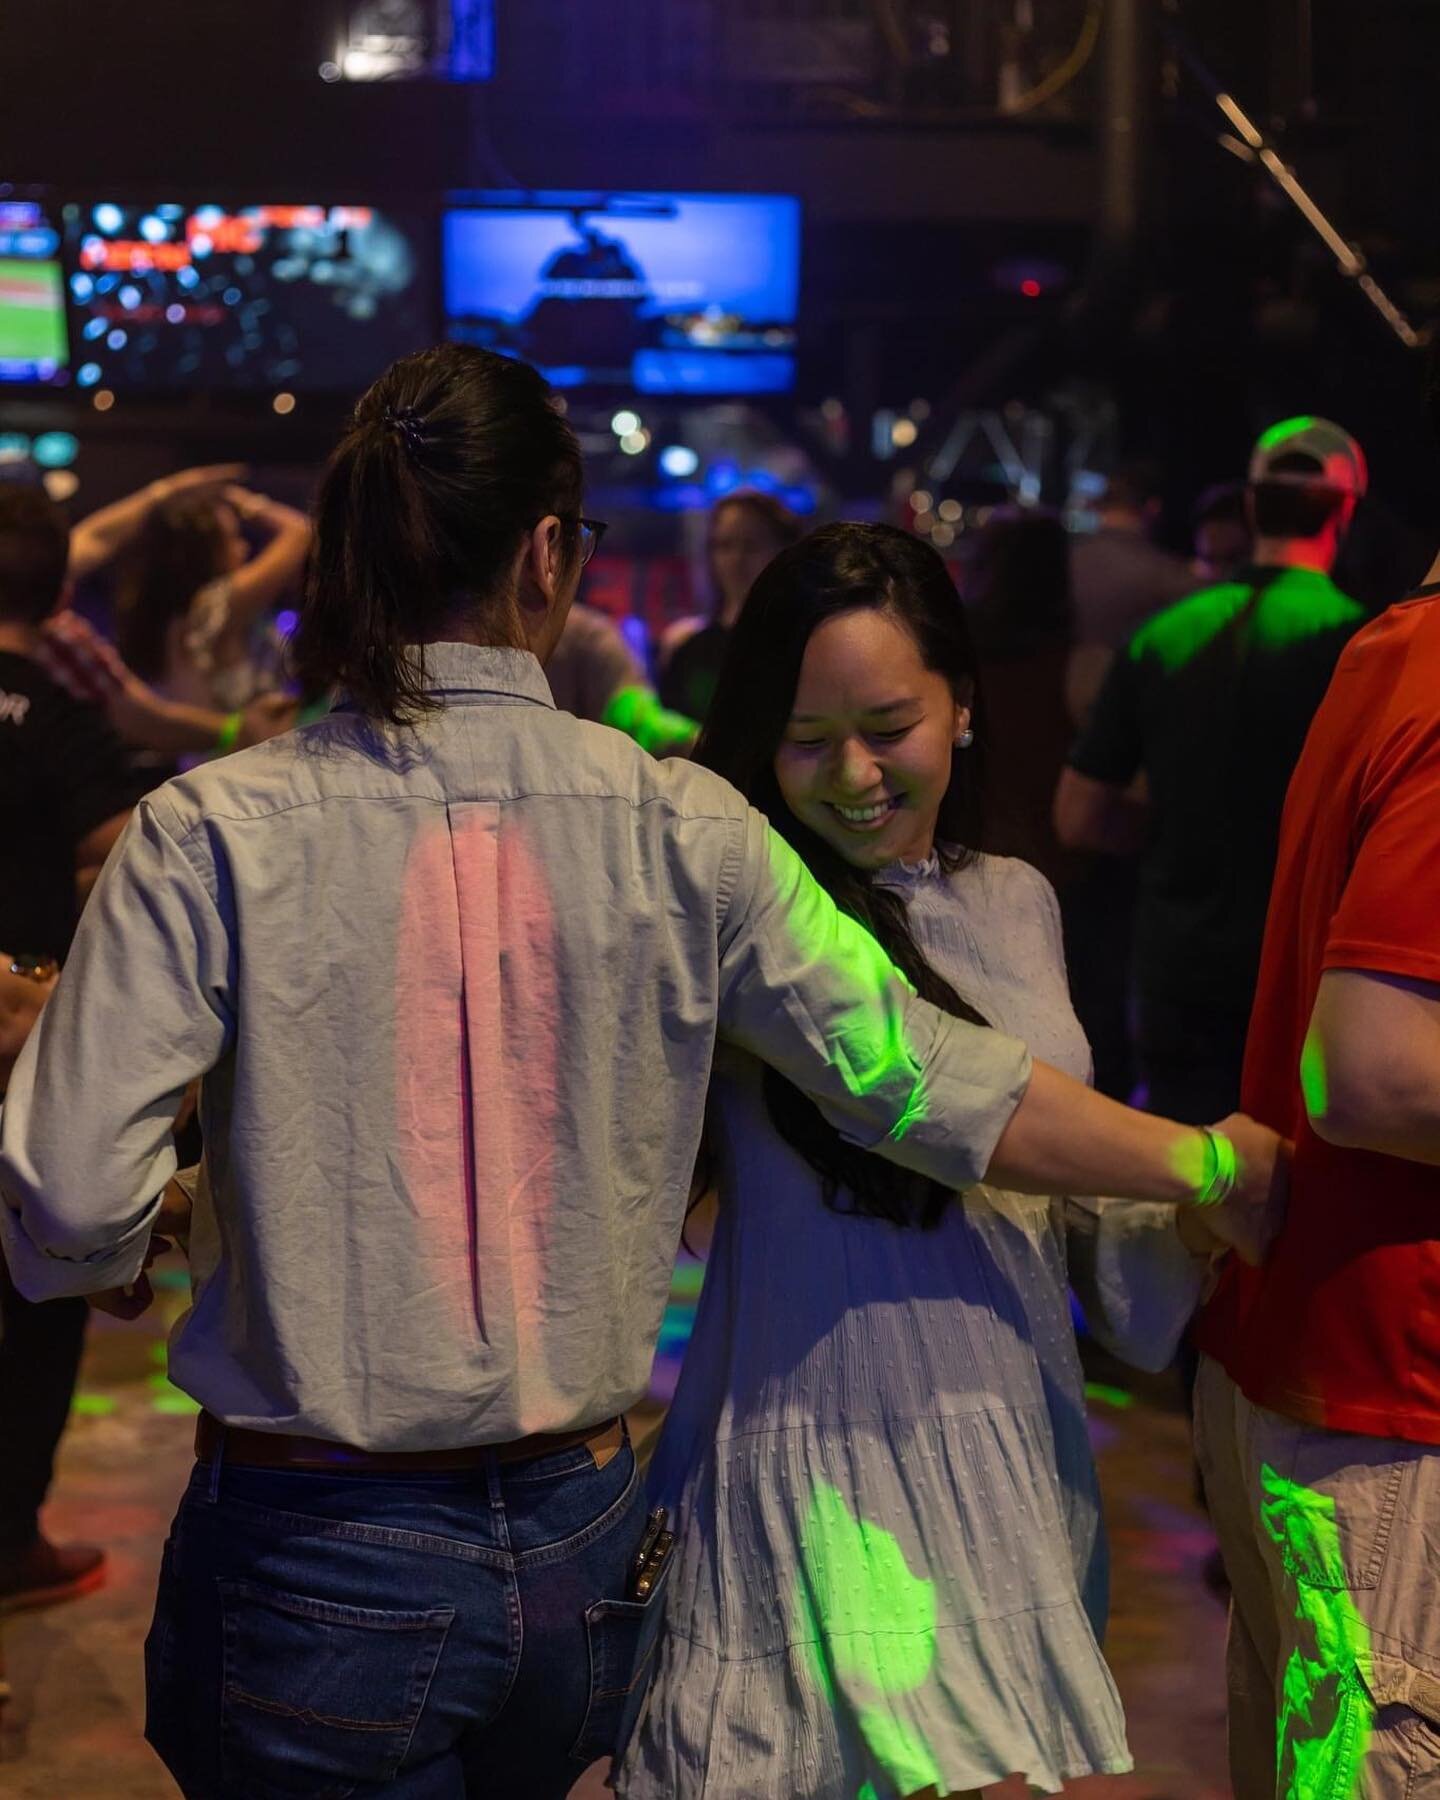 Looking for something fun to do while supporting a good cause? Every Tuesday night at @therenegadeva we host country dance lessons, no partner or experience needed! Come make new friends, enjoy good music, drinks, and food! Proceeds go towards fundin